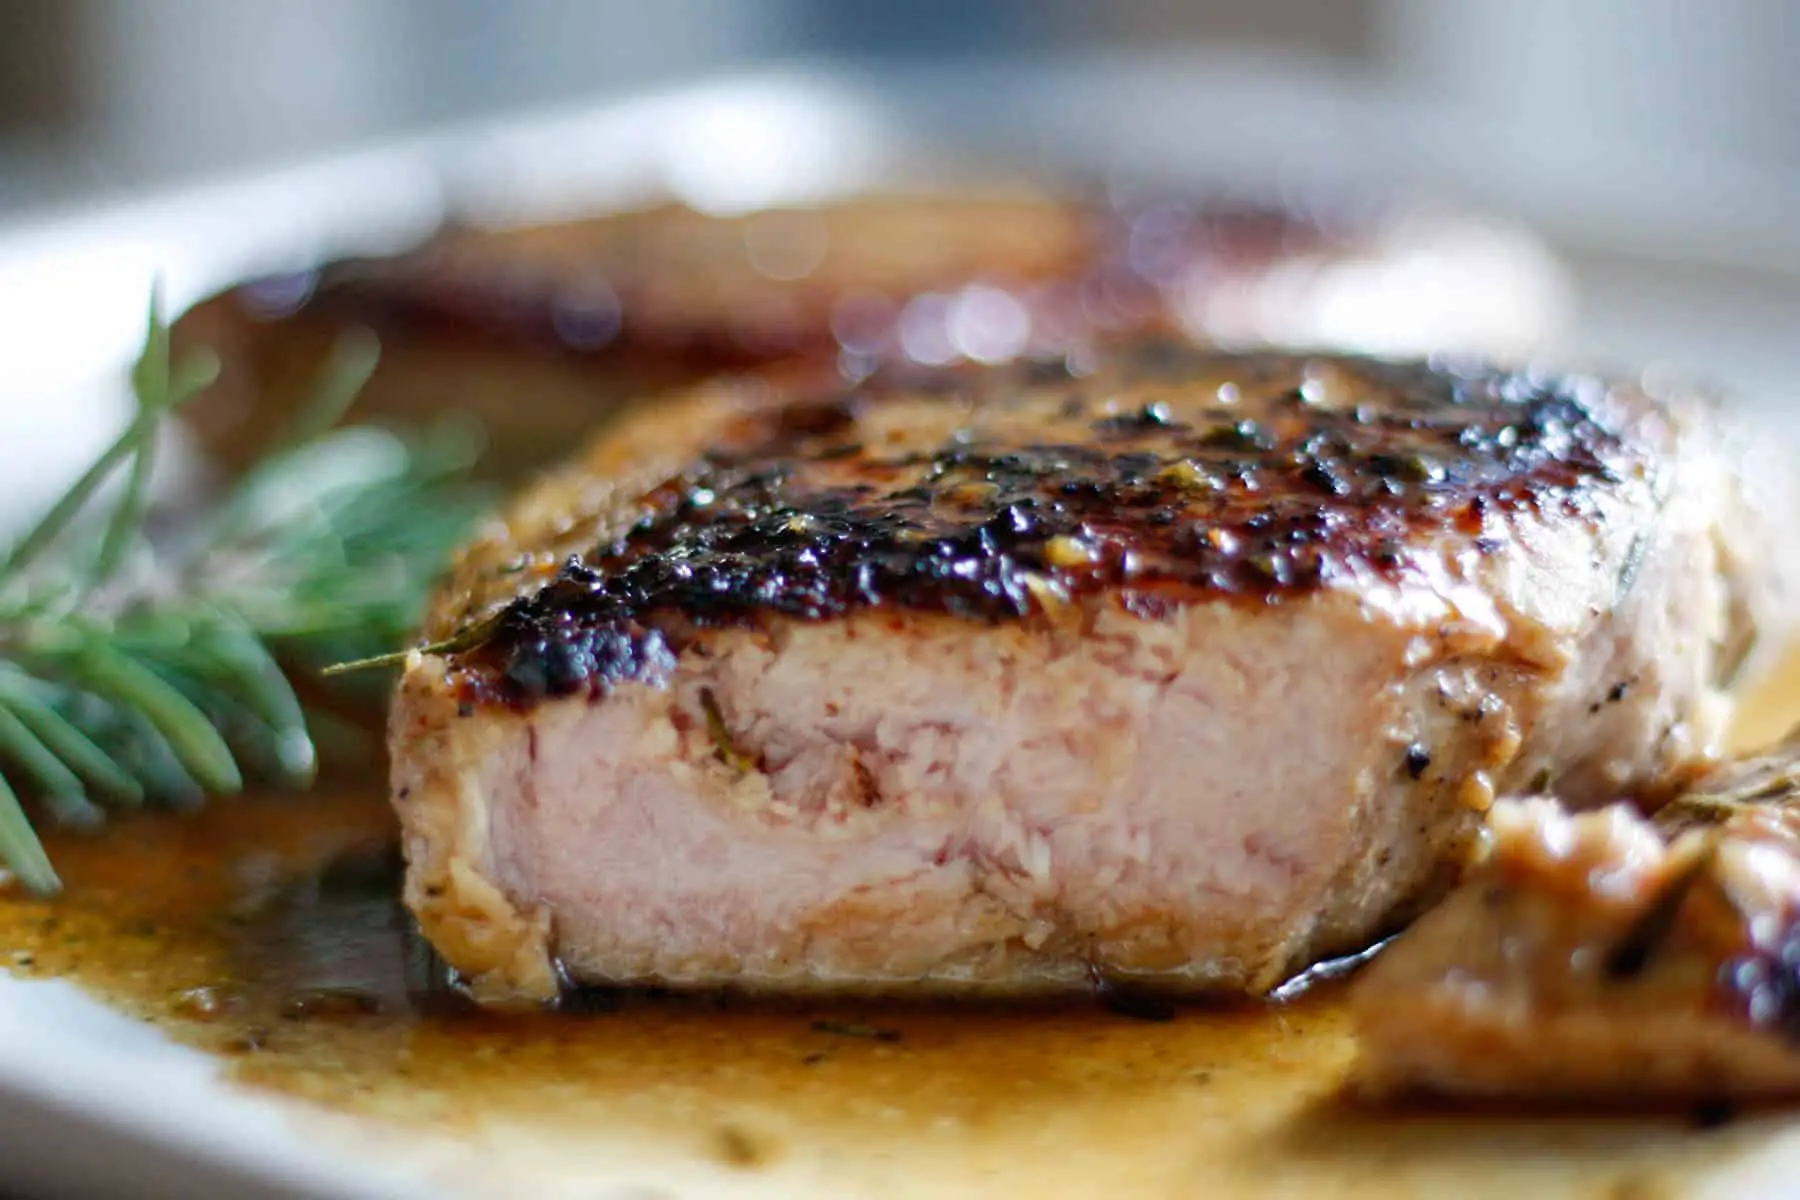 Pork chops with rosemary and caramelized sauce with one of the pork chops cut into.